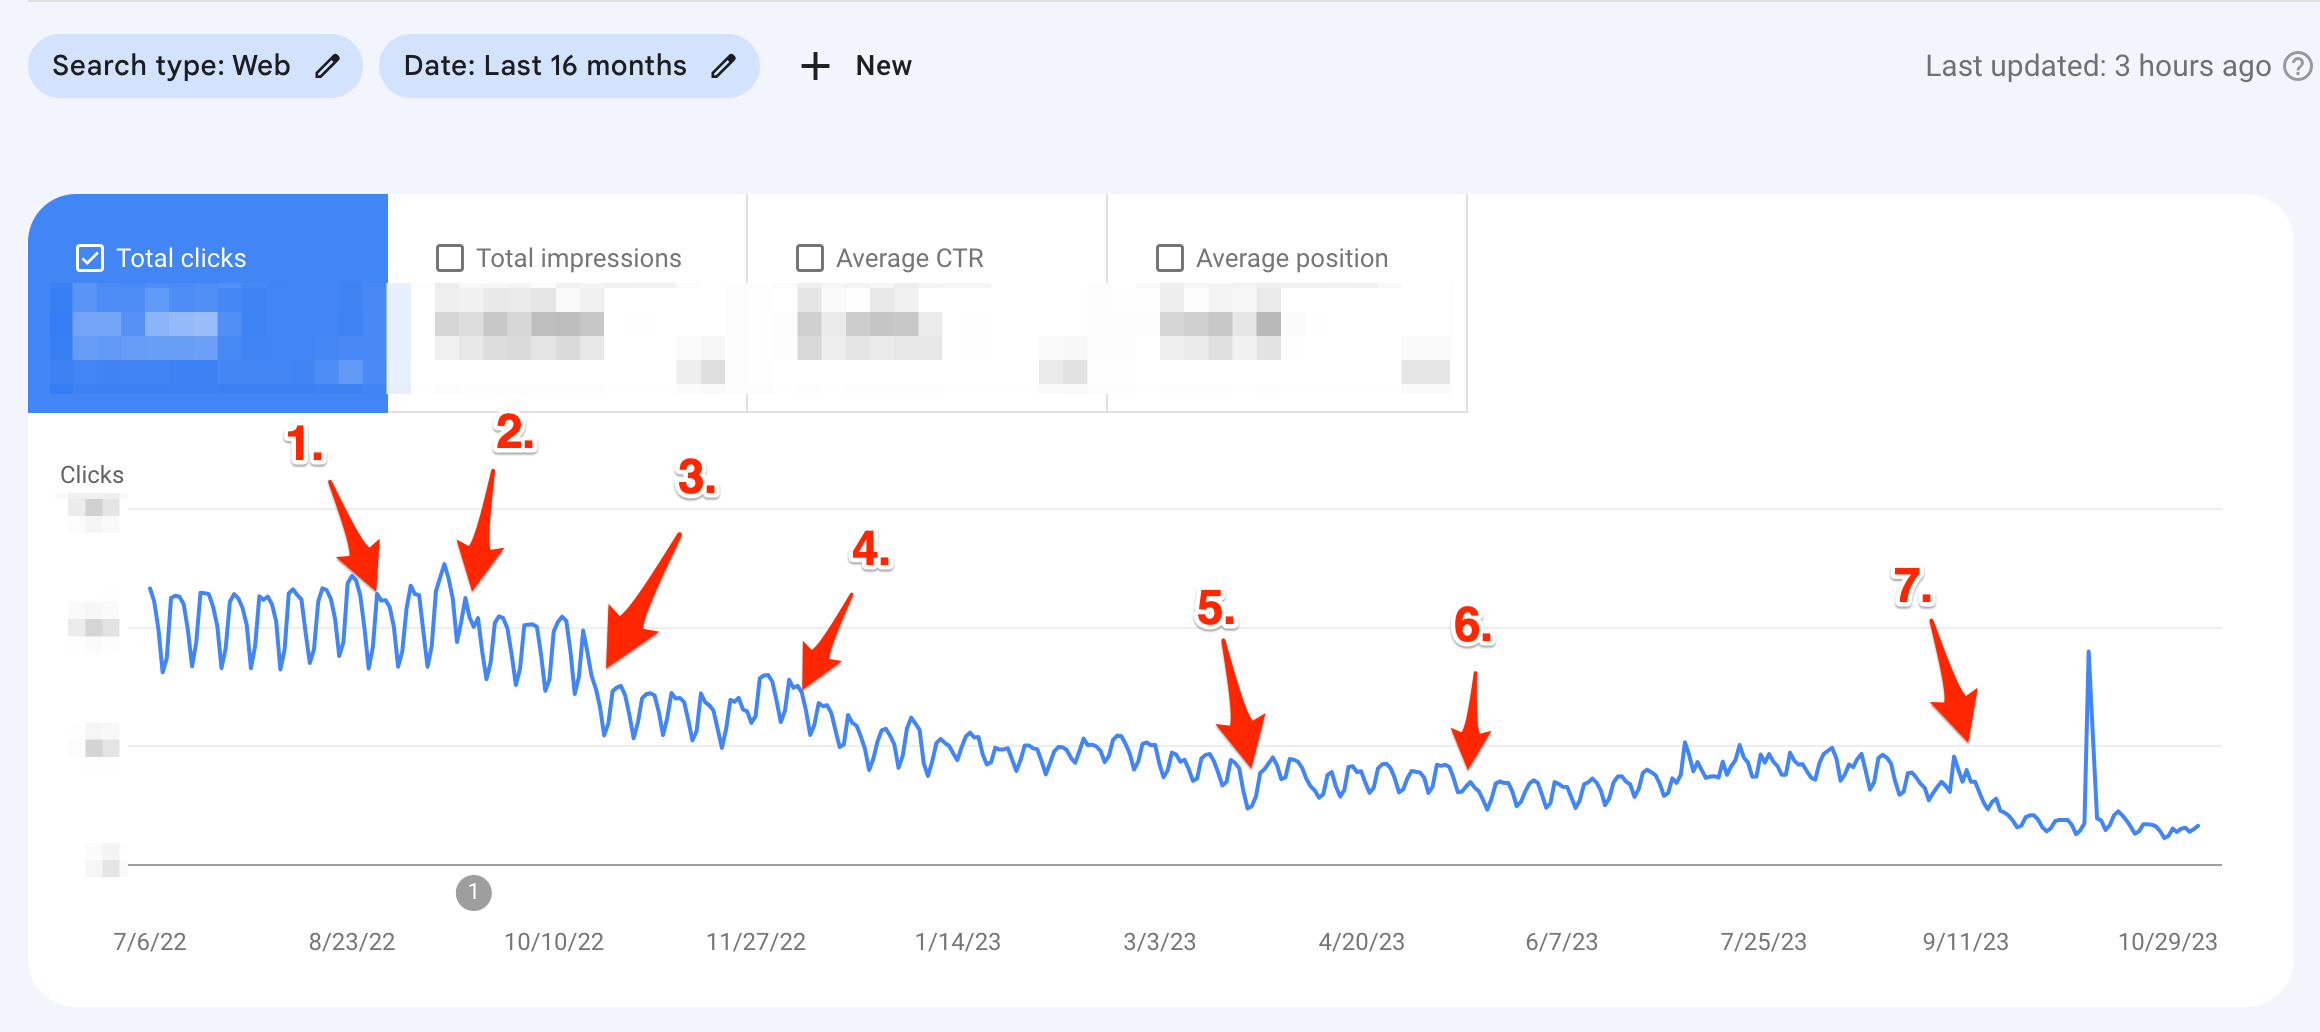 BrowserHow Performance Drop over 16 months - Google Search Console